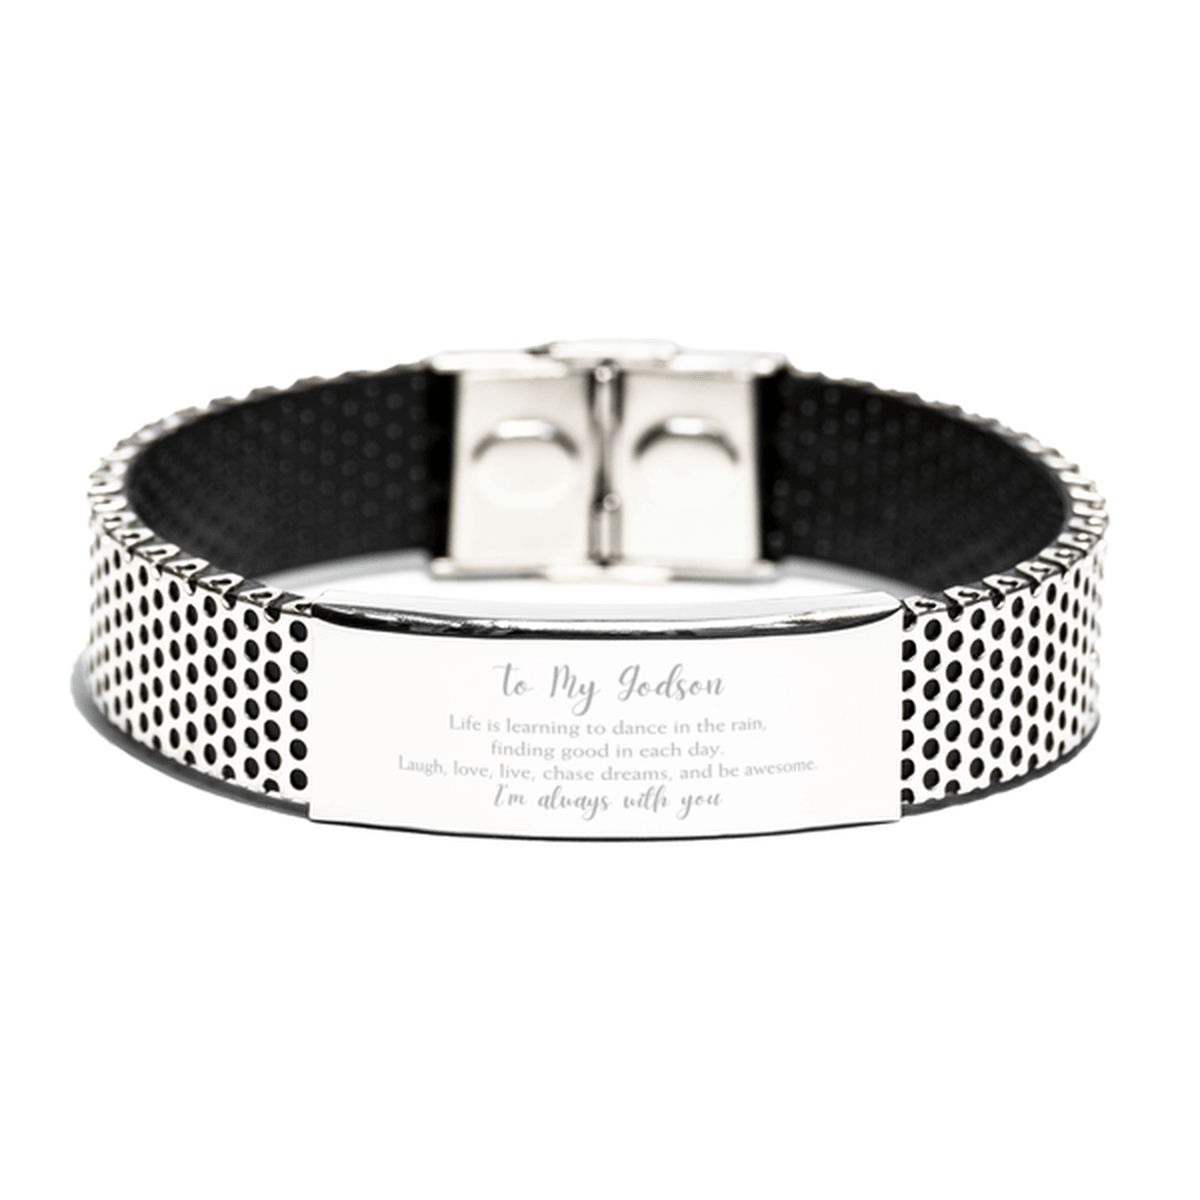 Godson Christmas Perfect Gifts, Godson Stainless Steel Bracelet, Motivational Godson Engraved Gifts, Birthday Gifts For Godson, To My Godson Life is learning to dance in the rain, finding good in each day. I'm always with you